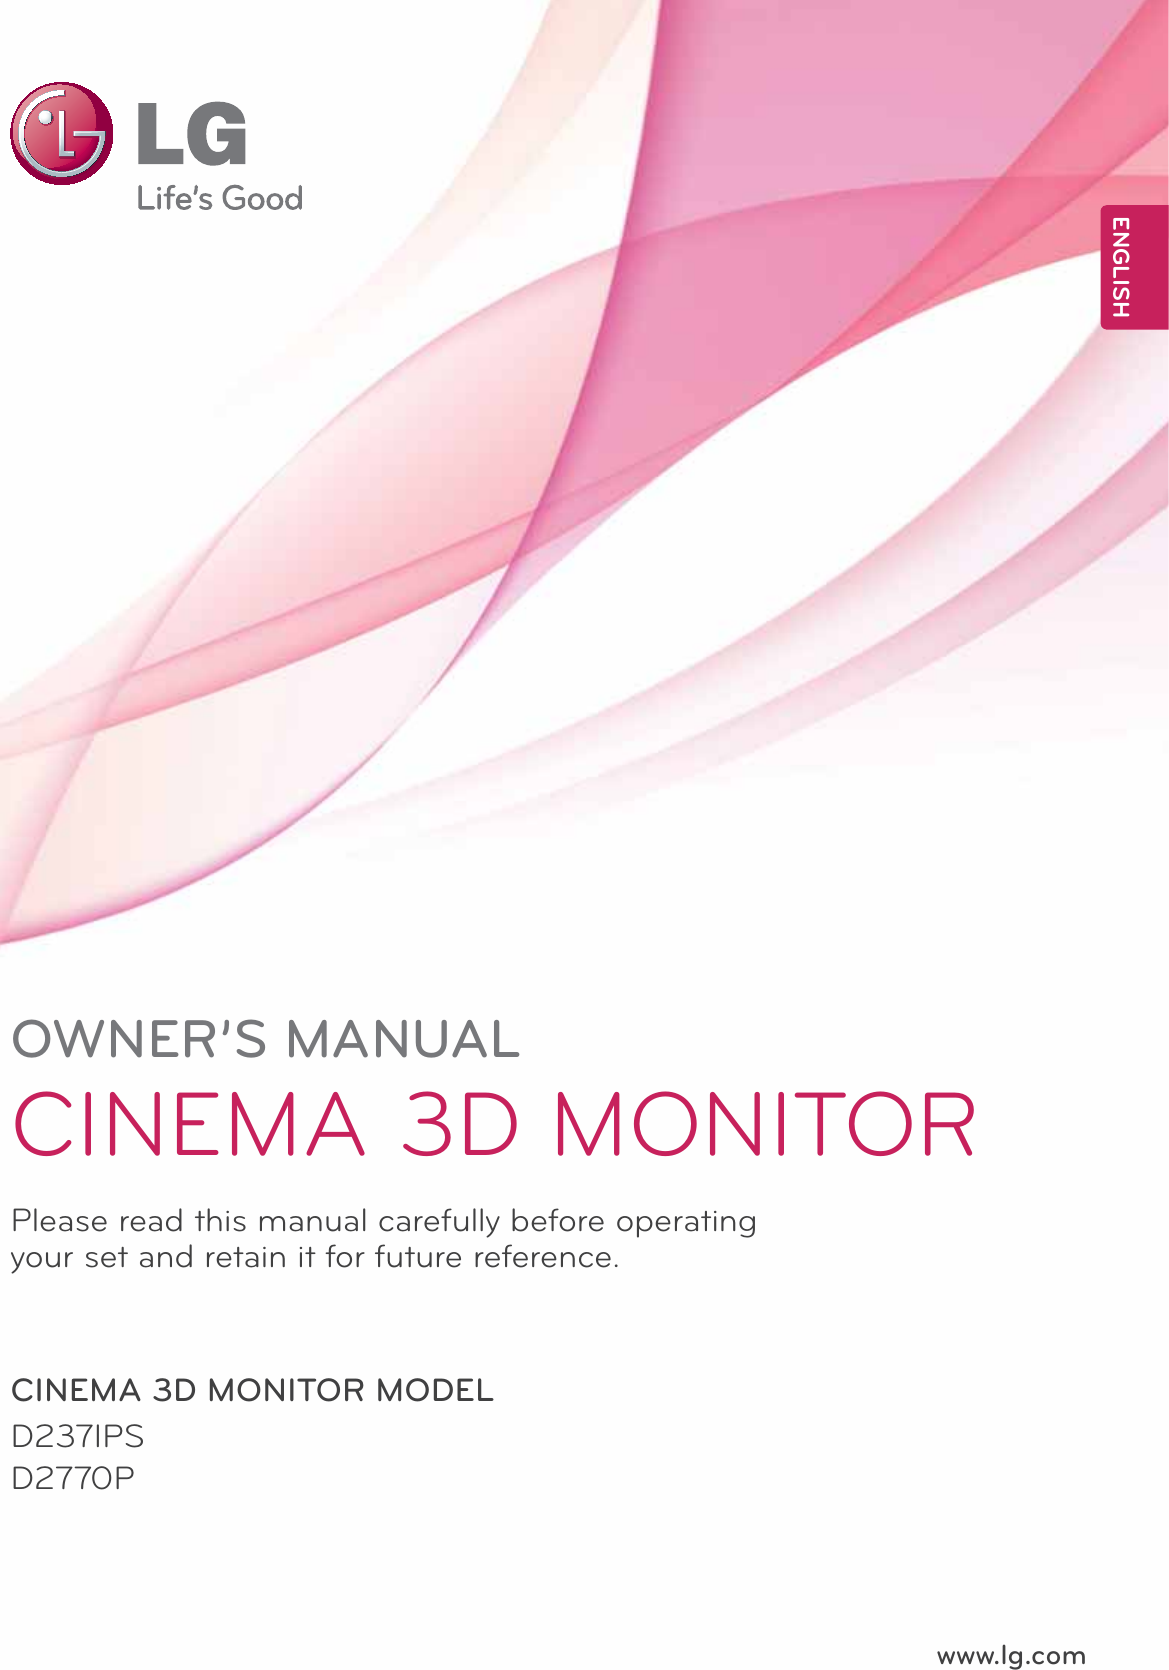 www.lg.comOWNER’S MANUALCINEMA 3D MONITORD237IPSD2770PPlease read this manual carefully before operating your set and retain it for future reference.CINEMA 3D MONITOR MODELENGLISH